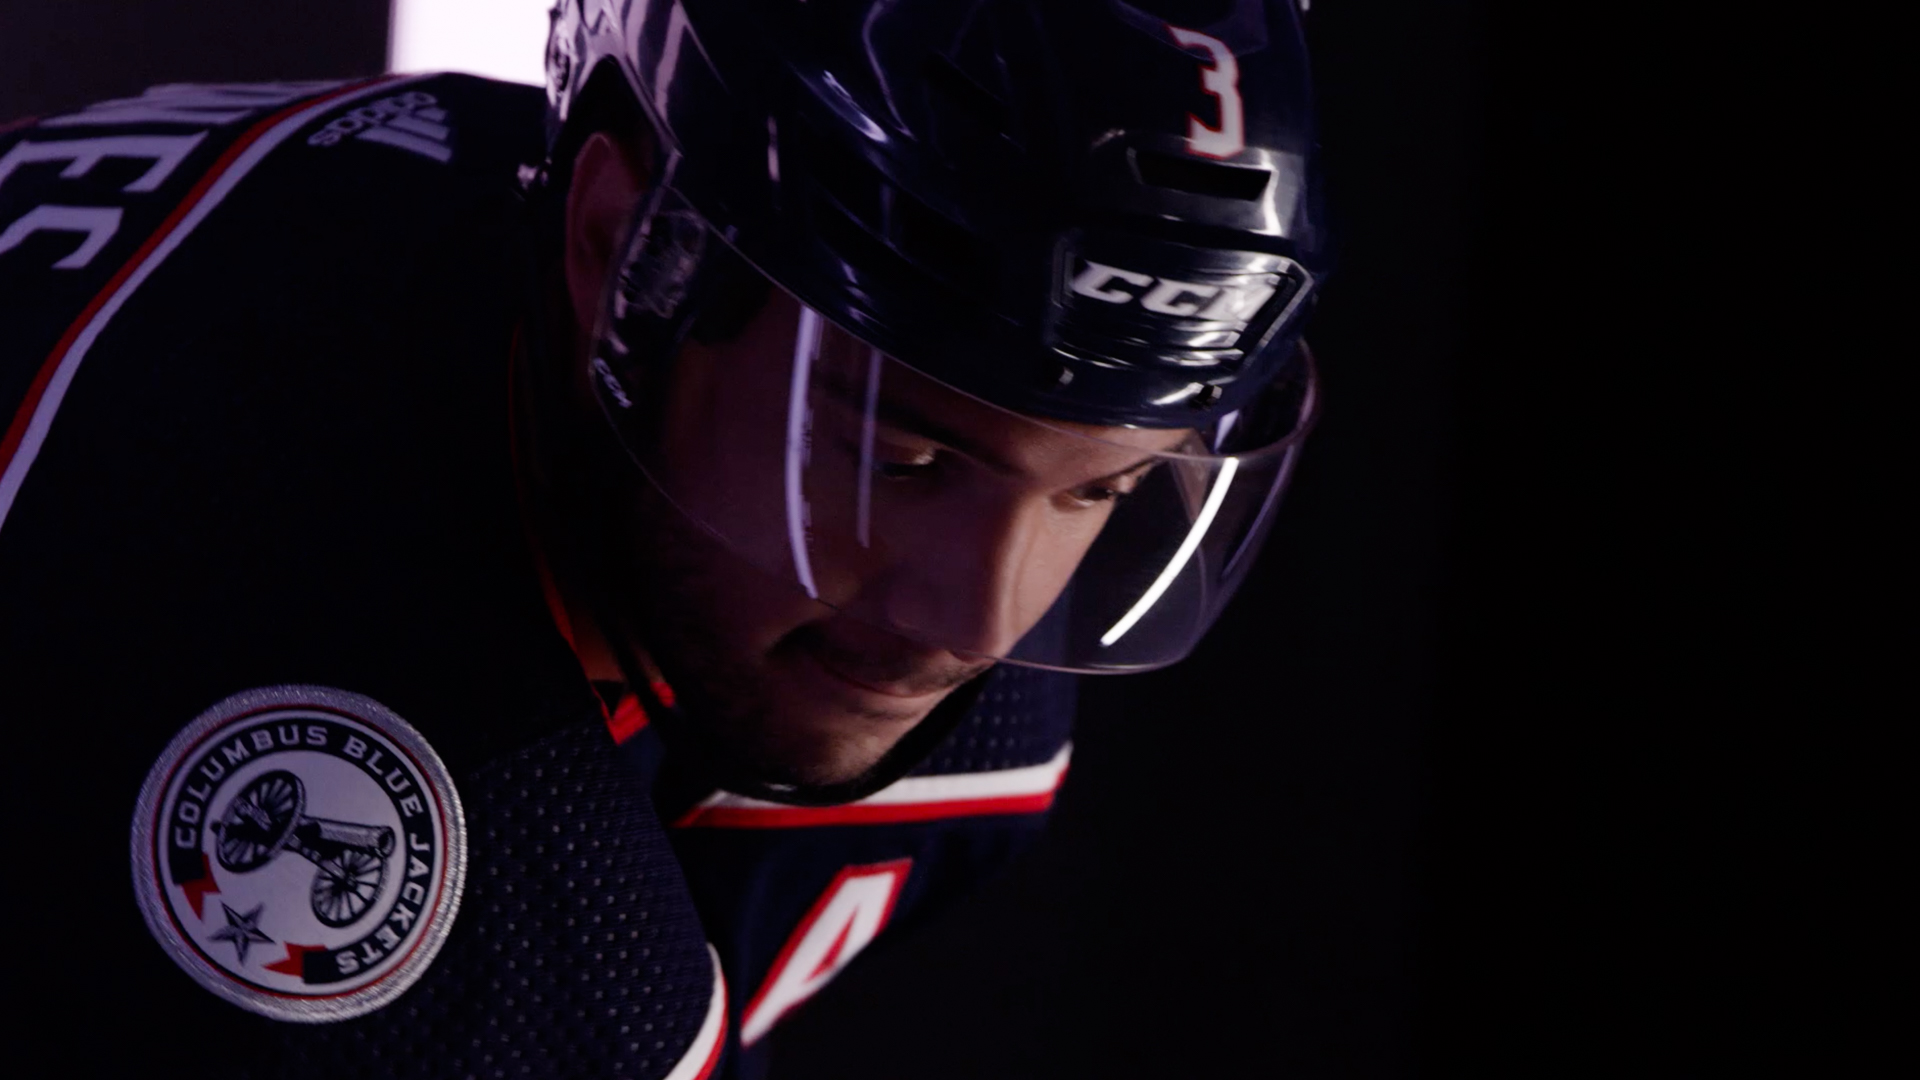 A darkened image of a hockey player in a Columbus Blue Jackets uniform, introspectively preparing for a game, with focused lighting emphasizing his concentration.